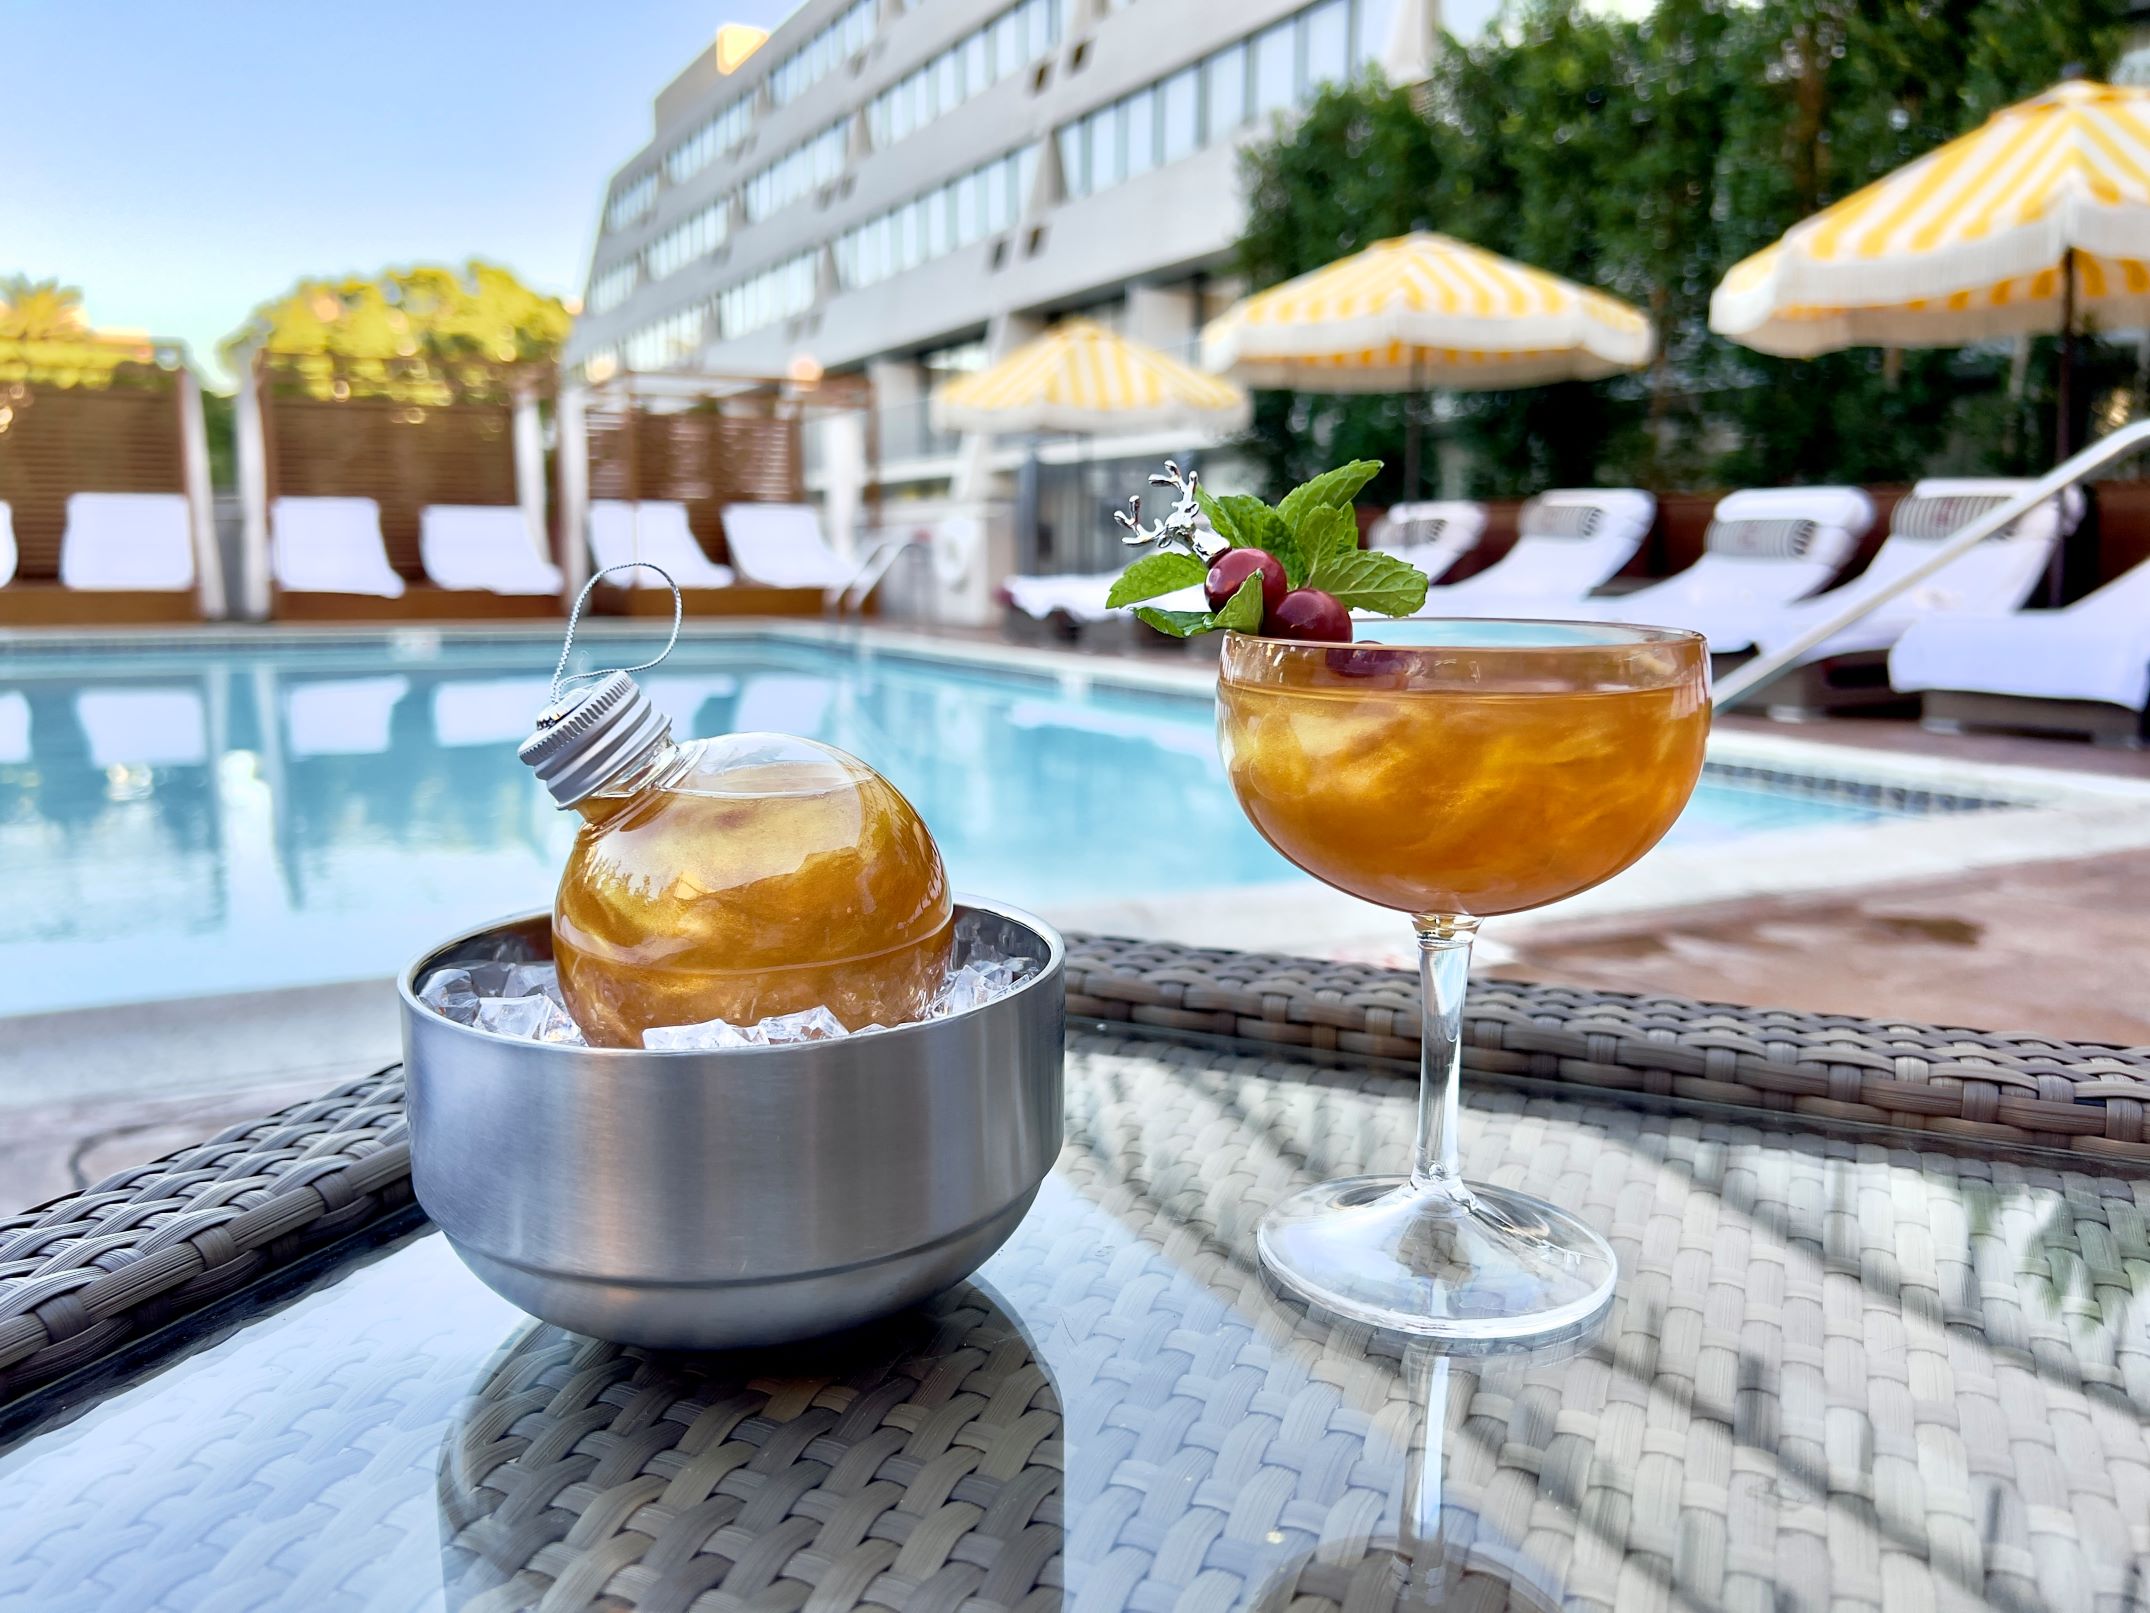 An image of Hotel Dena's Winter Peach cocktail.